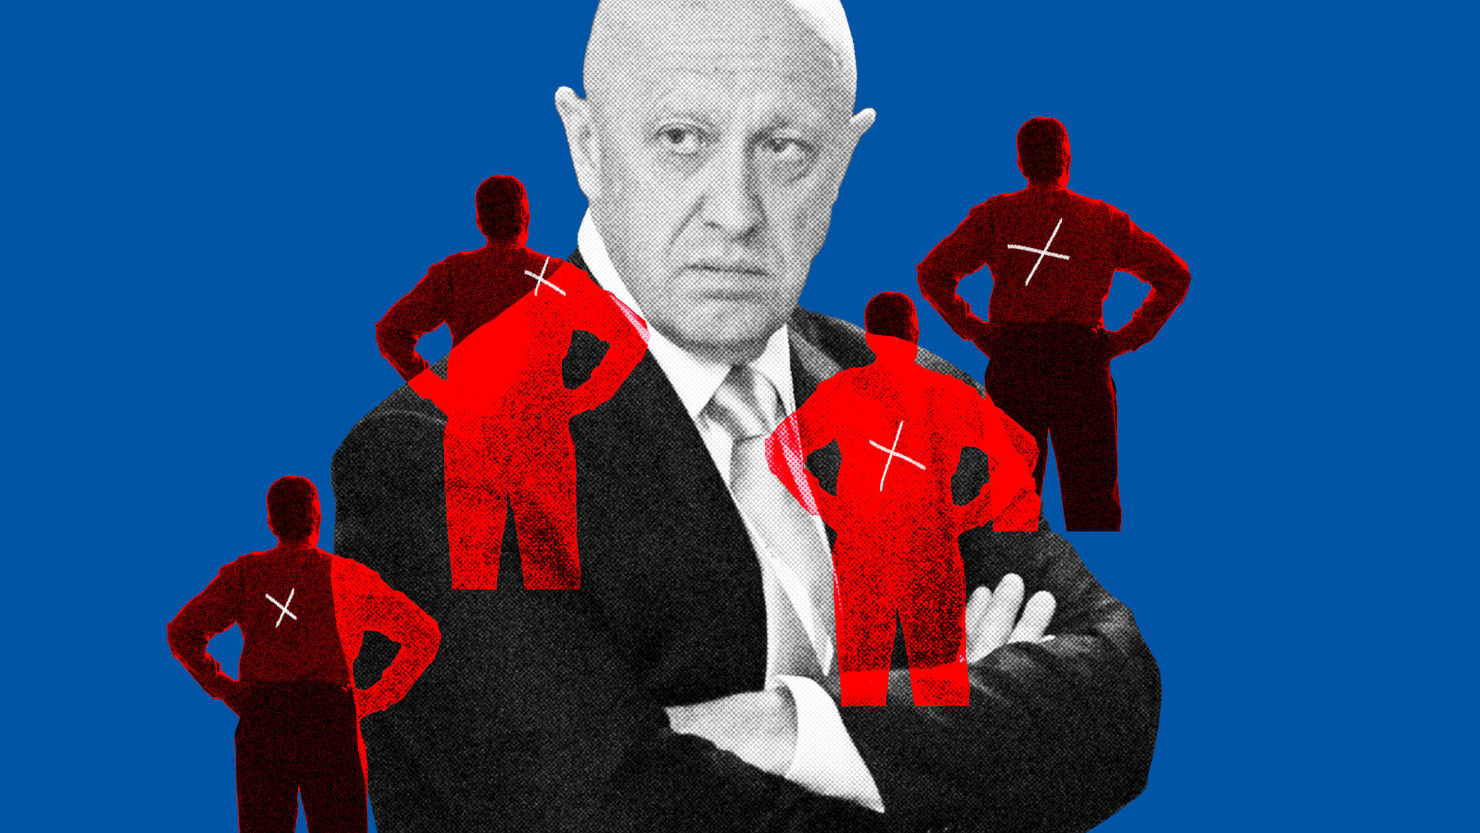 Putin Ali Yevgeny Prigozhin turns against Russian officials in a wave of backstabbing